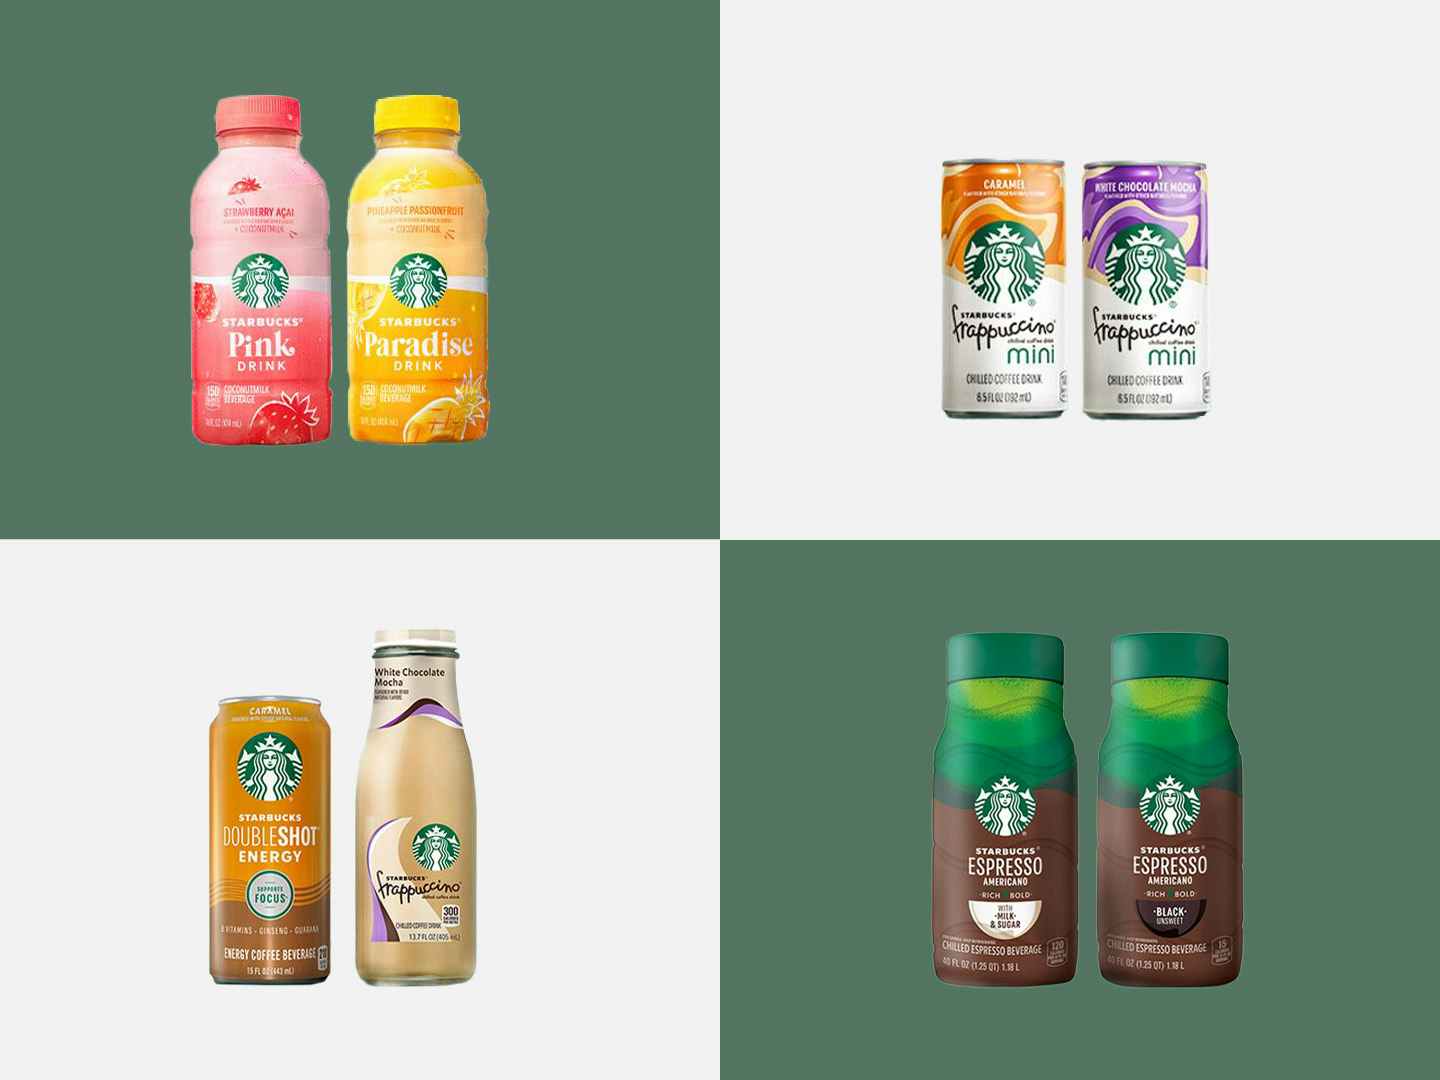 https://prod-cdn-thekrazycouponlady.imgix.net/wp-content/uploads/2023/04/starbucks-ready-to-drink-beverages-pink-drink-coffees-1680877015-1680877015.jpg?auto=format&fit=fill&q=25